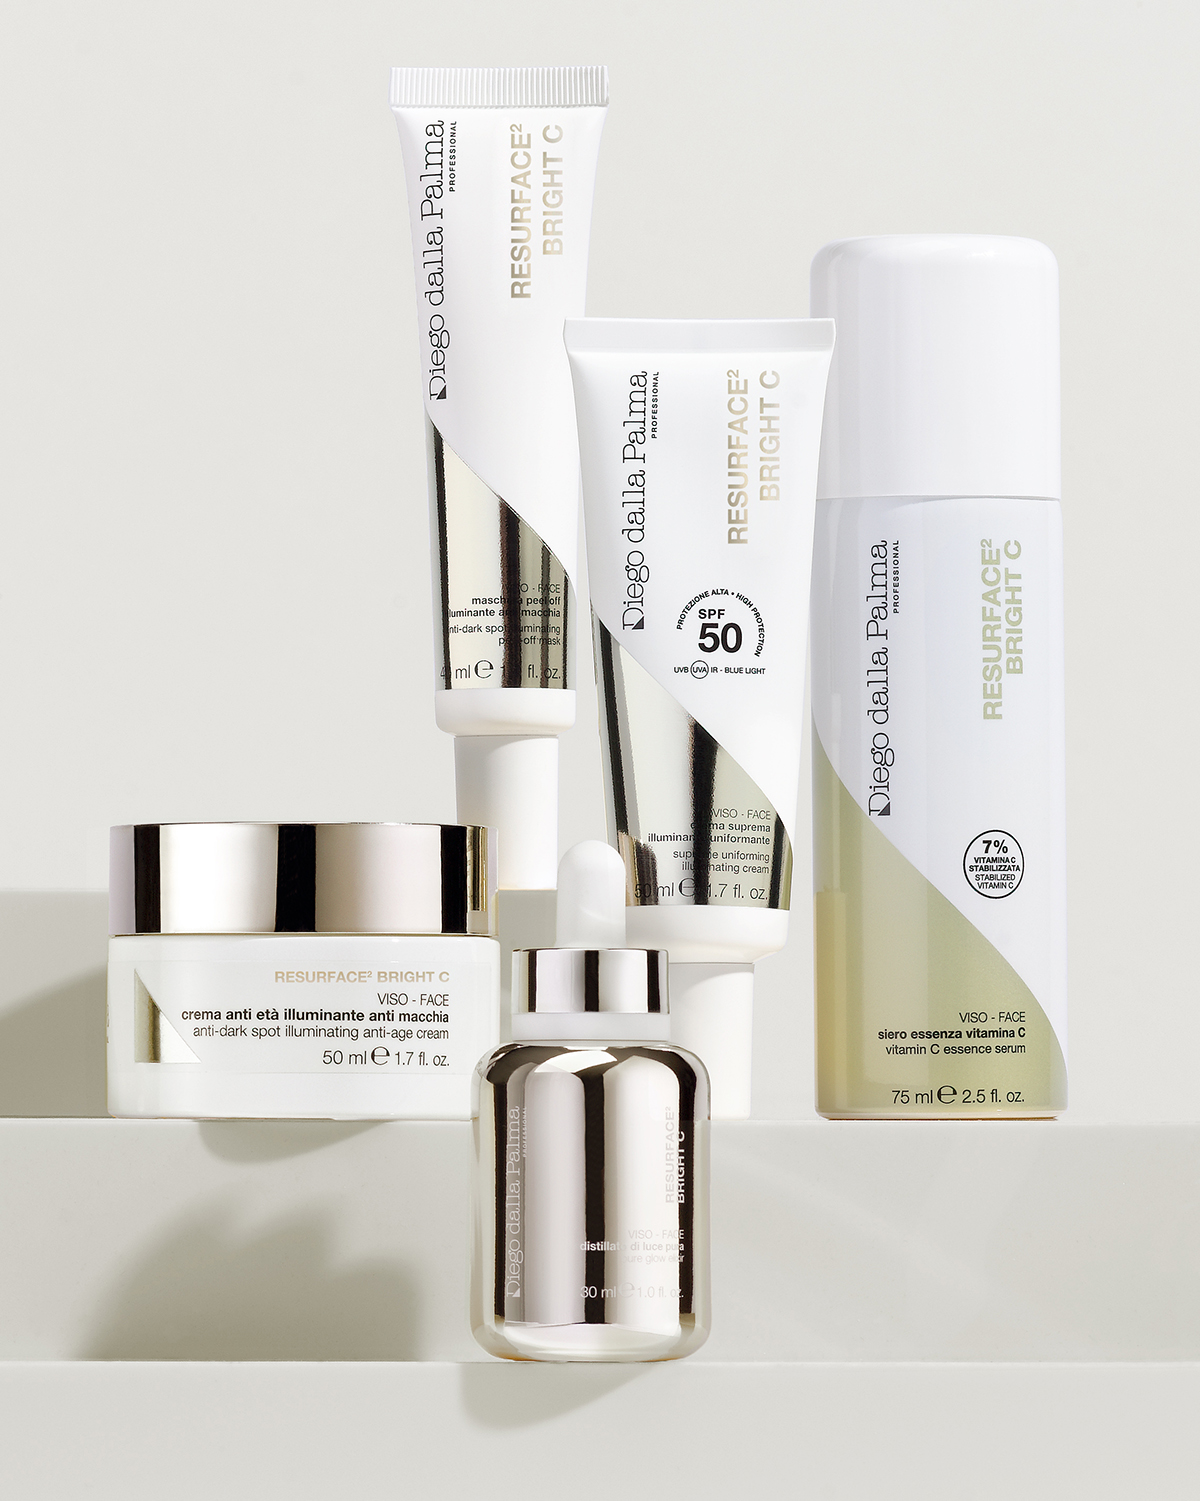 Diego dalla Palma Resurface2 Bright C is here to illuminate your complexion 14